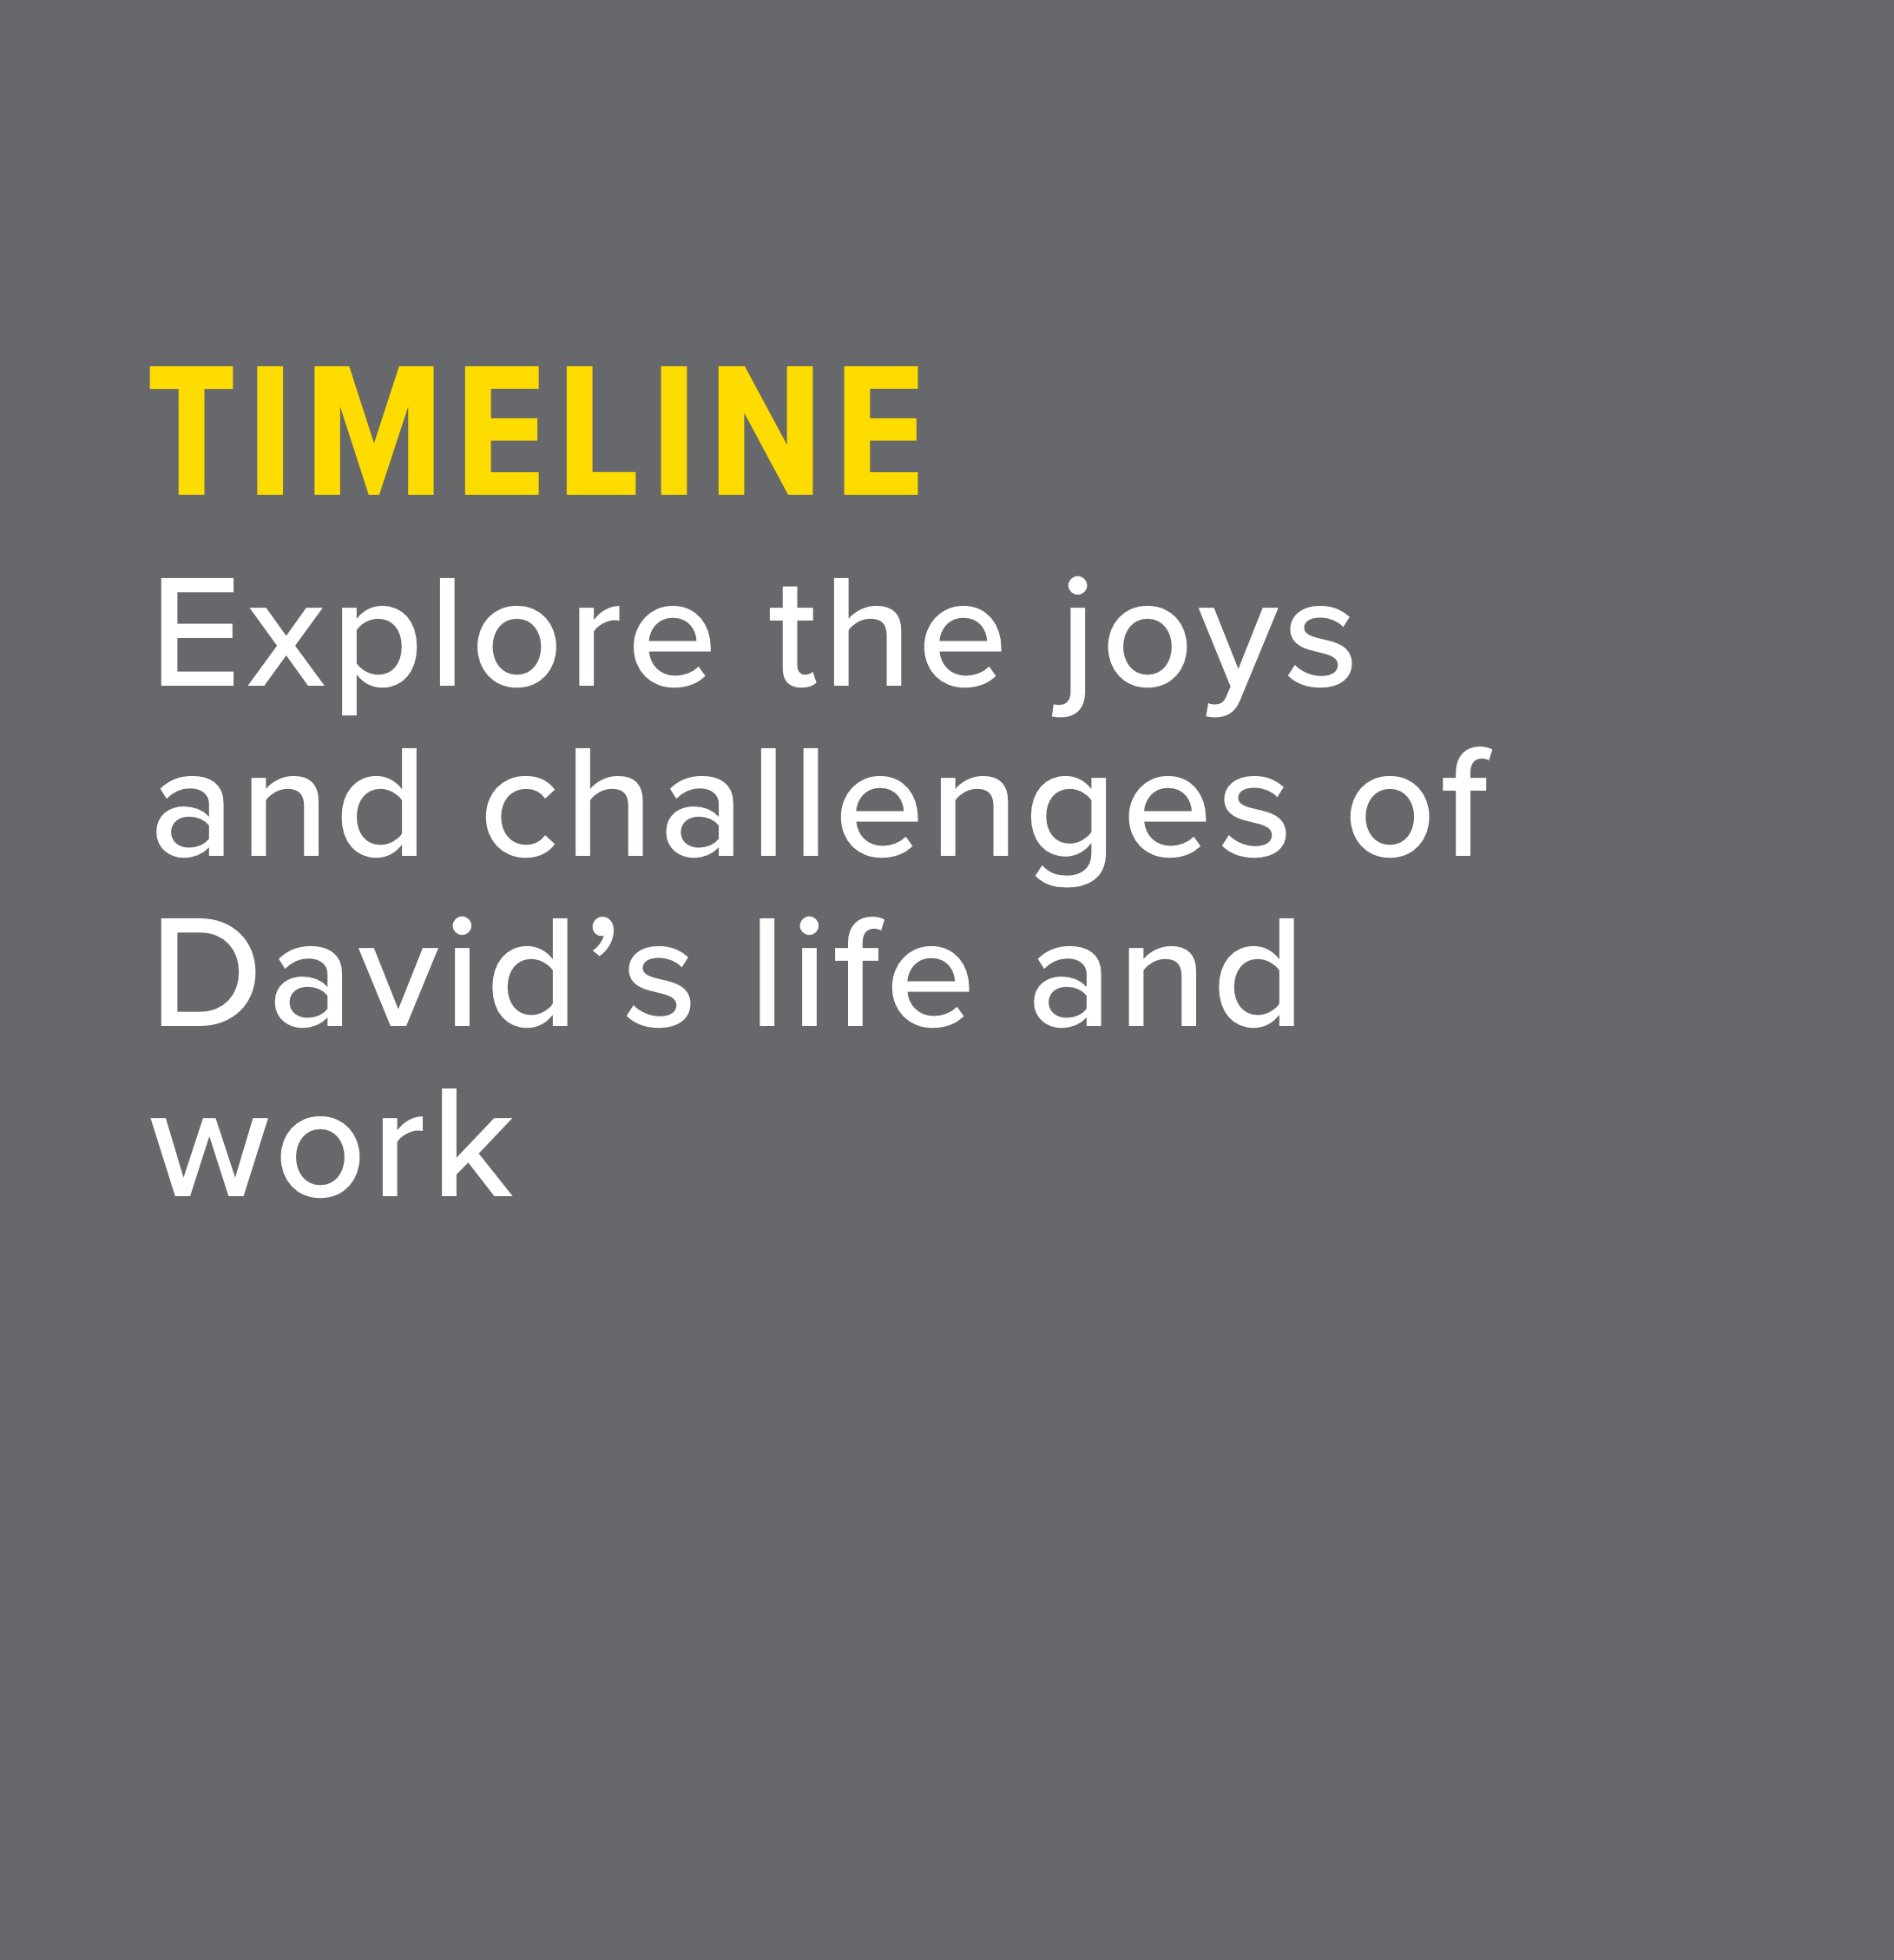 Explore the joys and challenges of David’s life and work